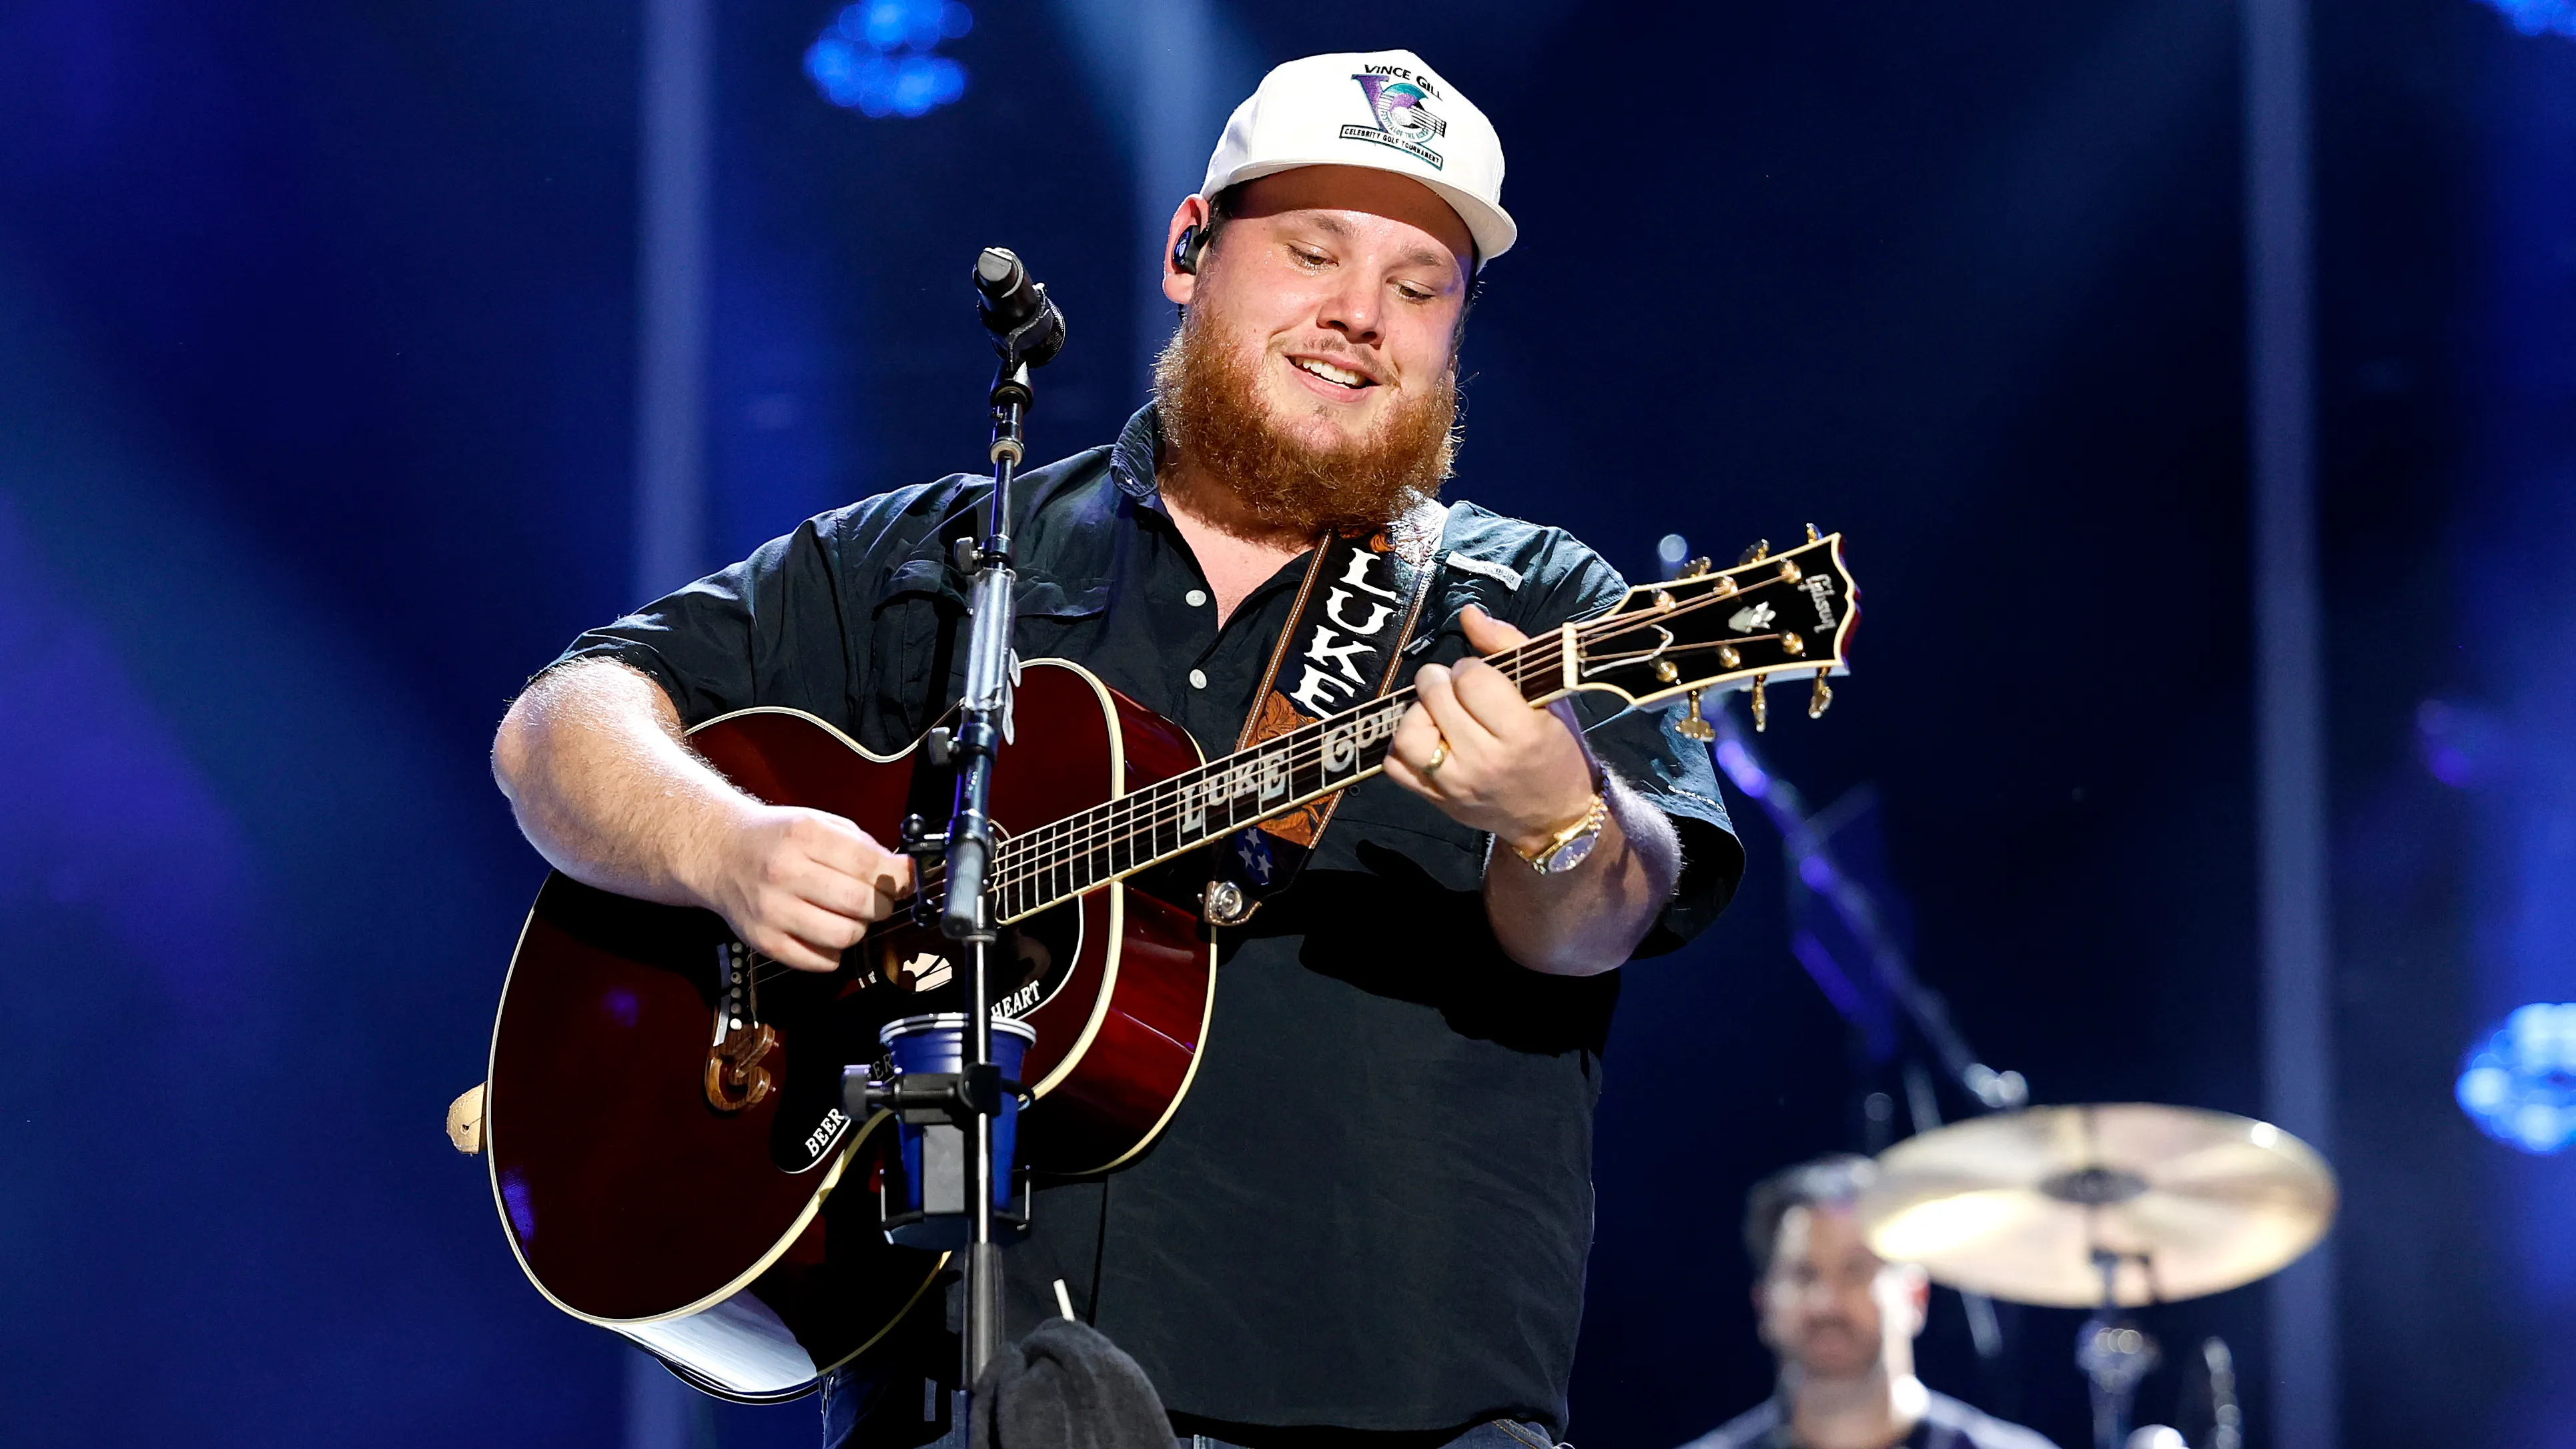 Luke Combs joined during 'Fast Car' performance by 8-year-old with cancer: 'I literally stole' the show